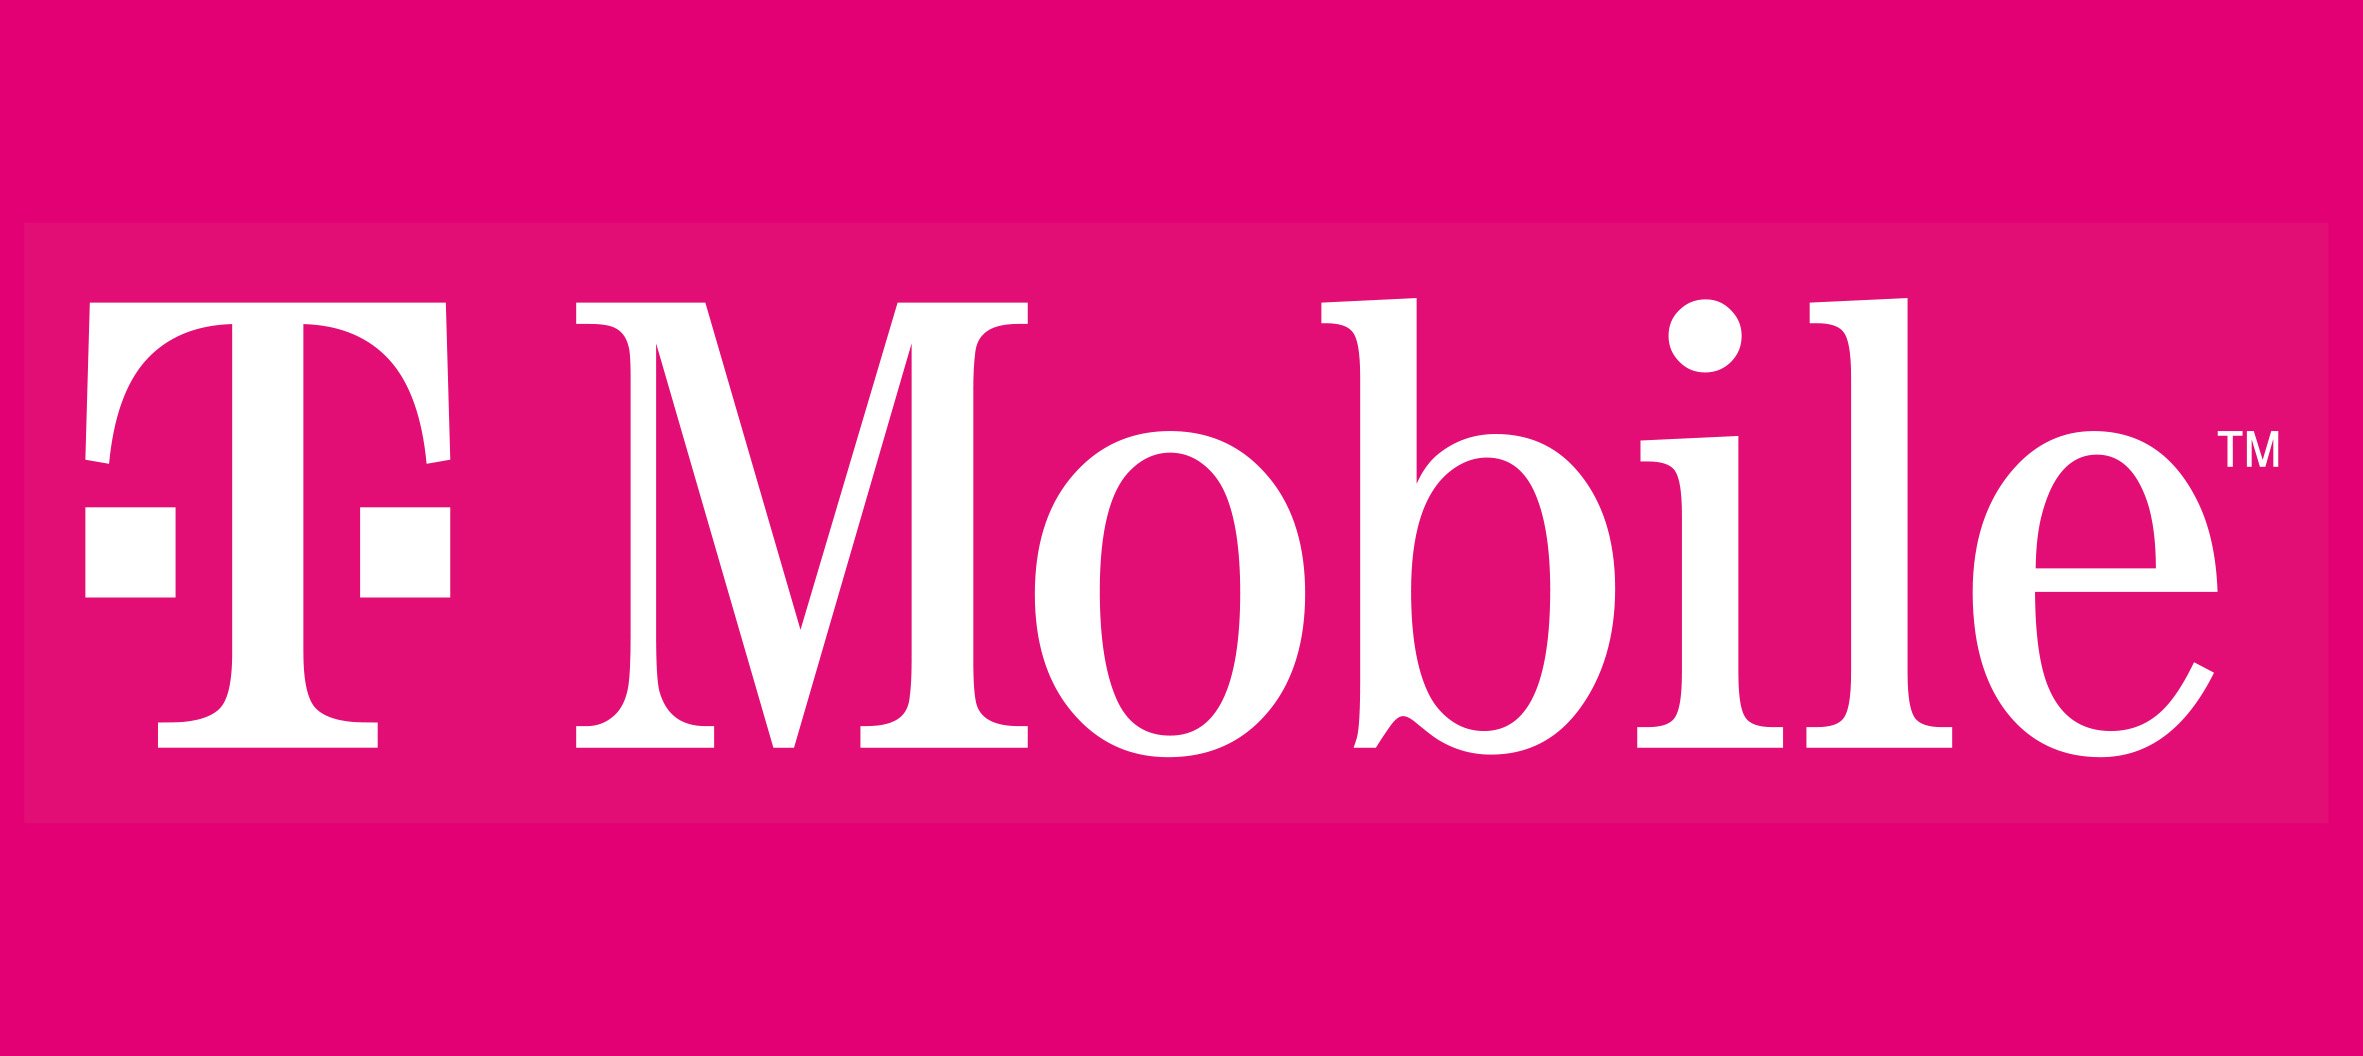 The T-Mobile Hack: At Least 49 Million Accounts Compromised...